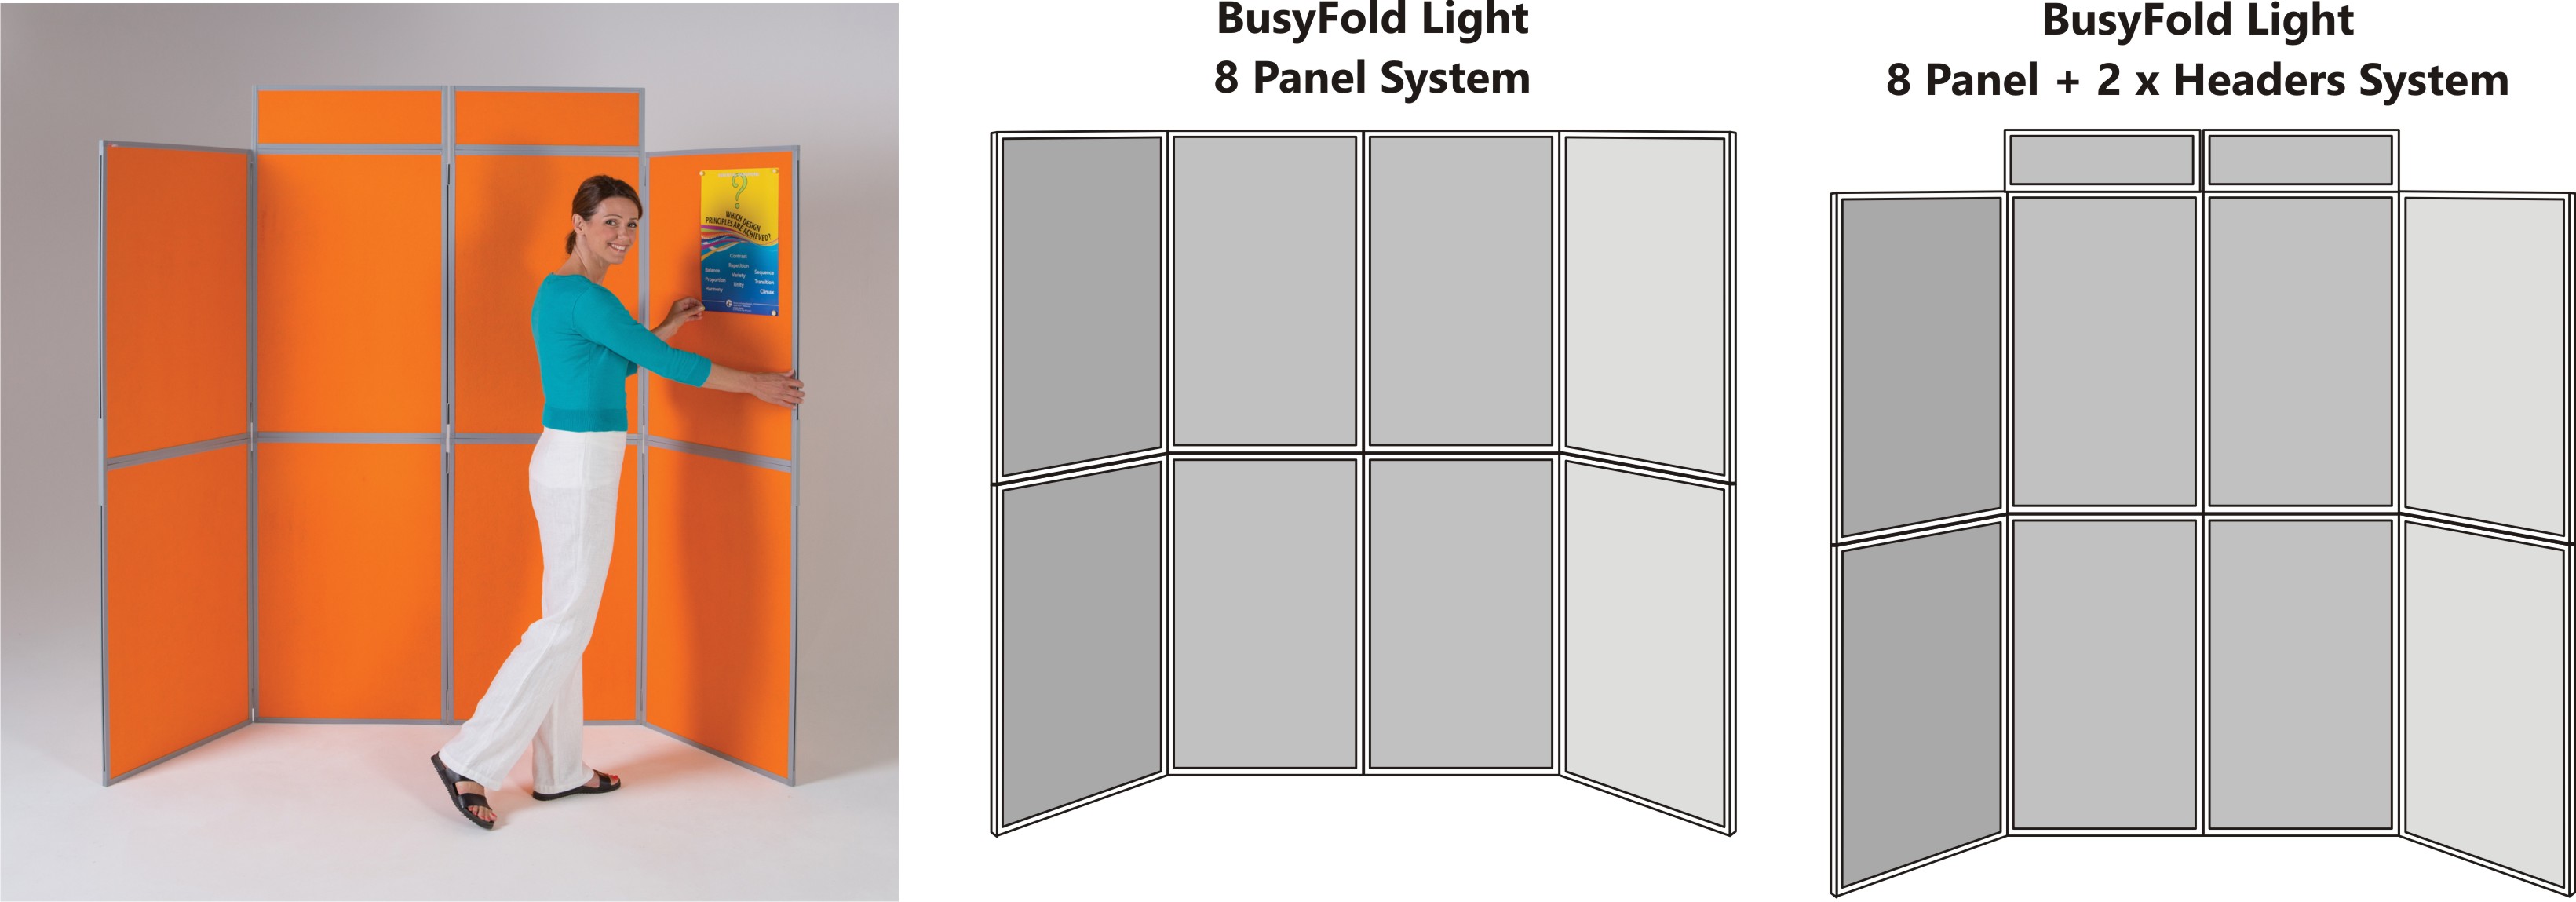 BusyFold Light 7 Panel Display System